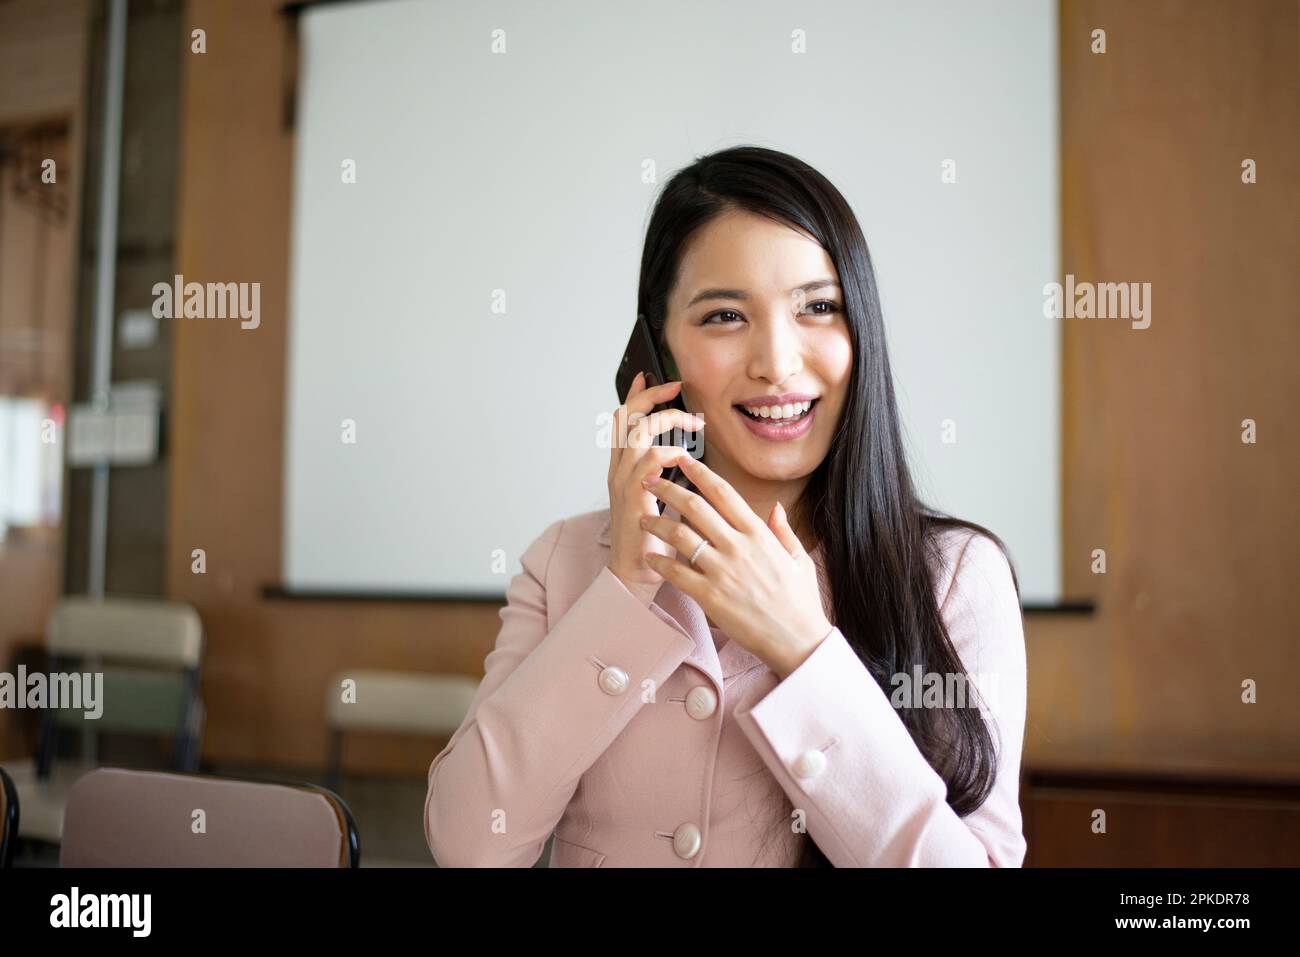 Woman on phone in office Stock Photo